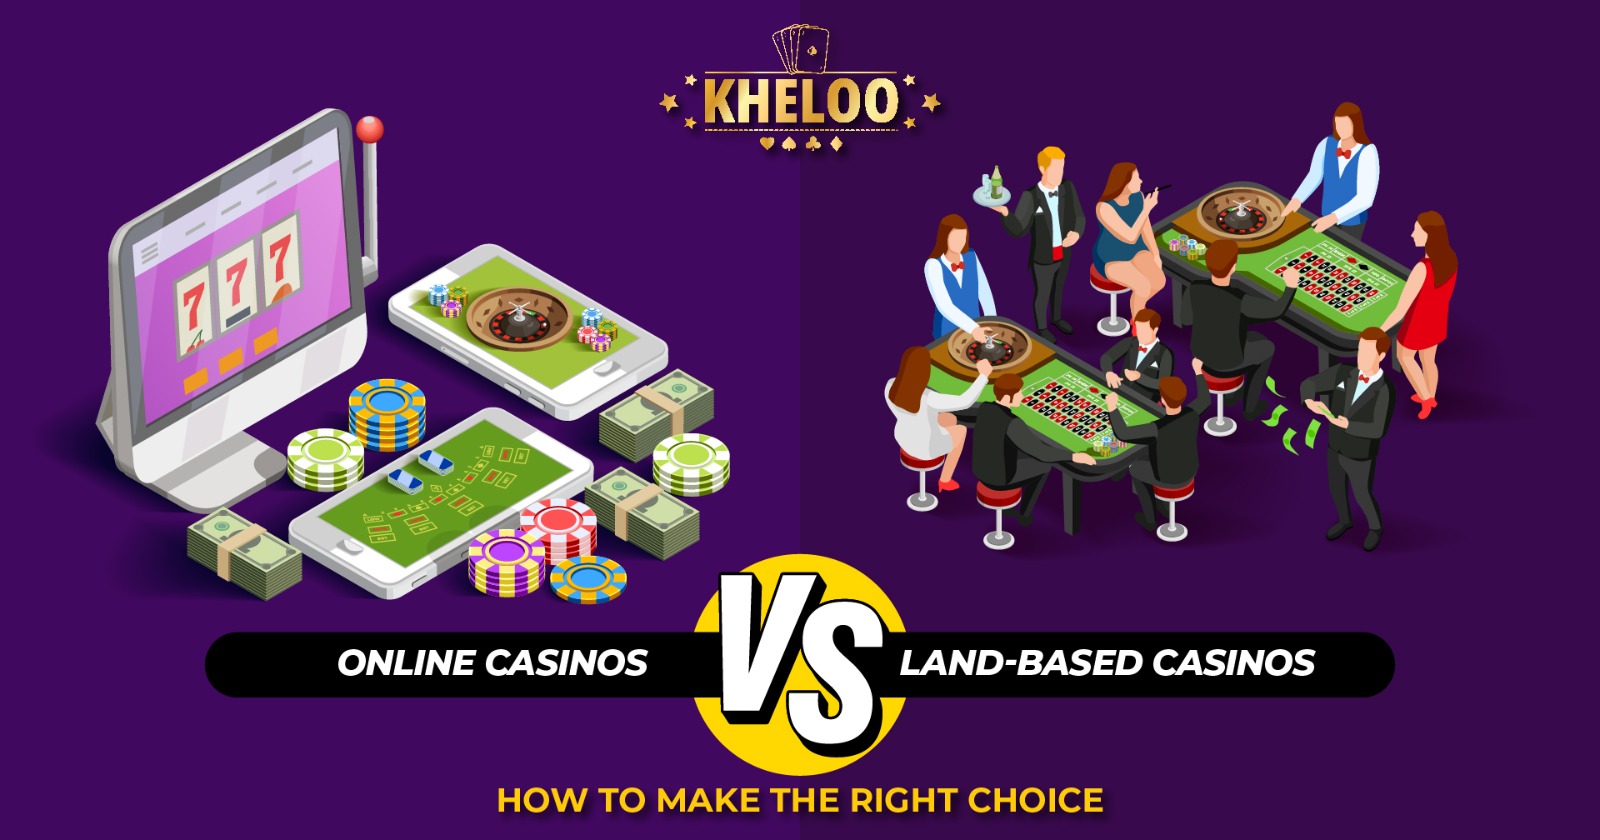 What Are the Differences Between Land-Based and Online Casino Technology?